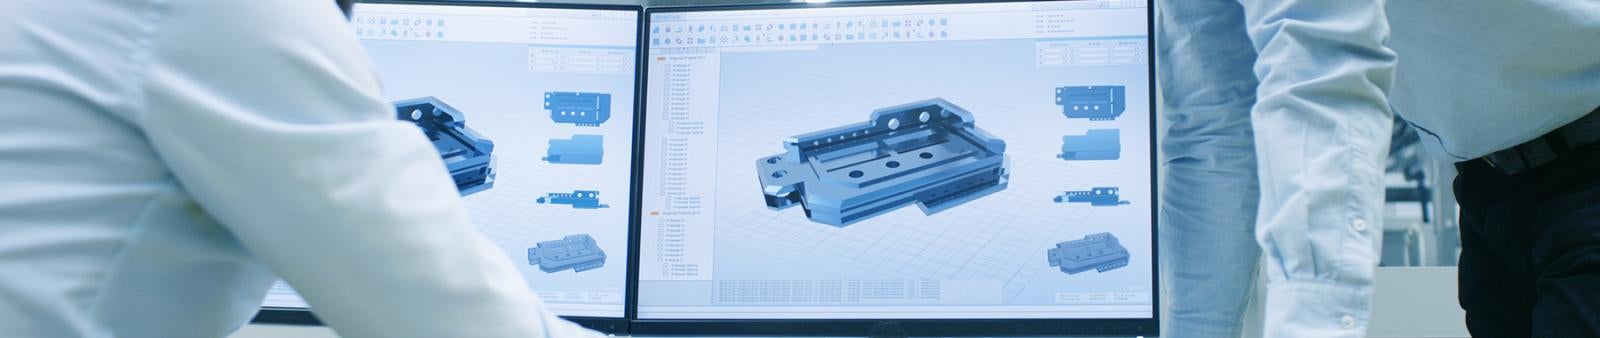 Drafting CAD Technology Banner Image